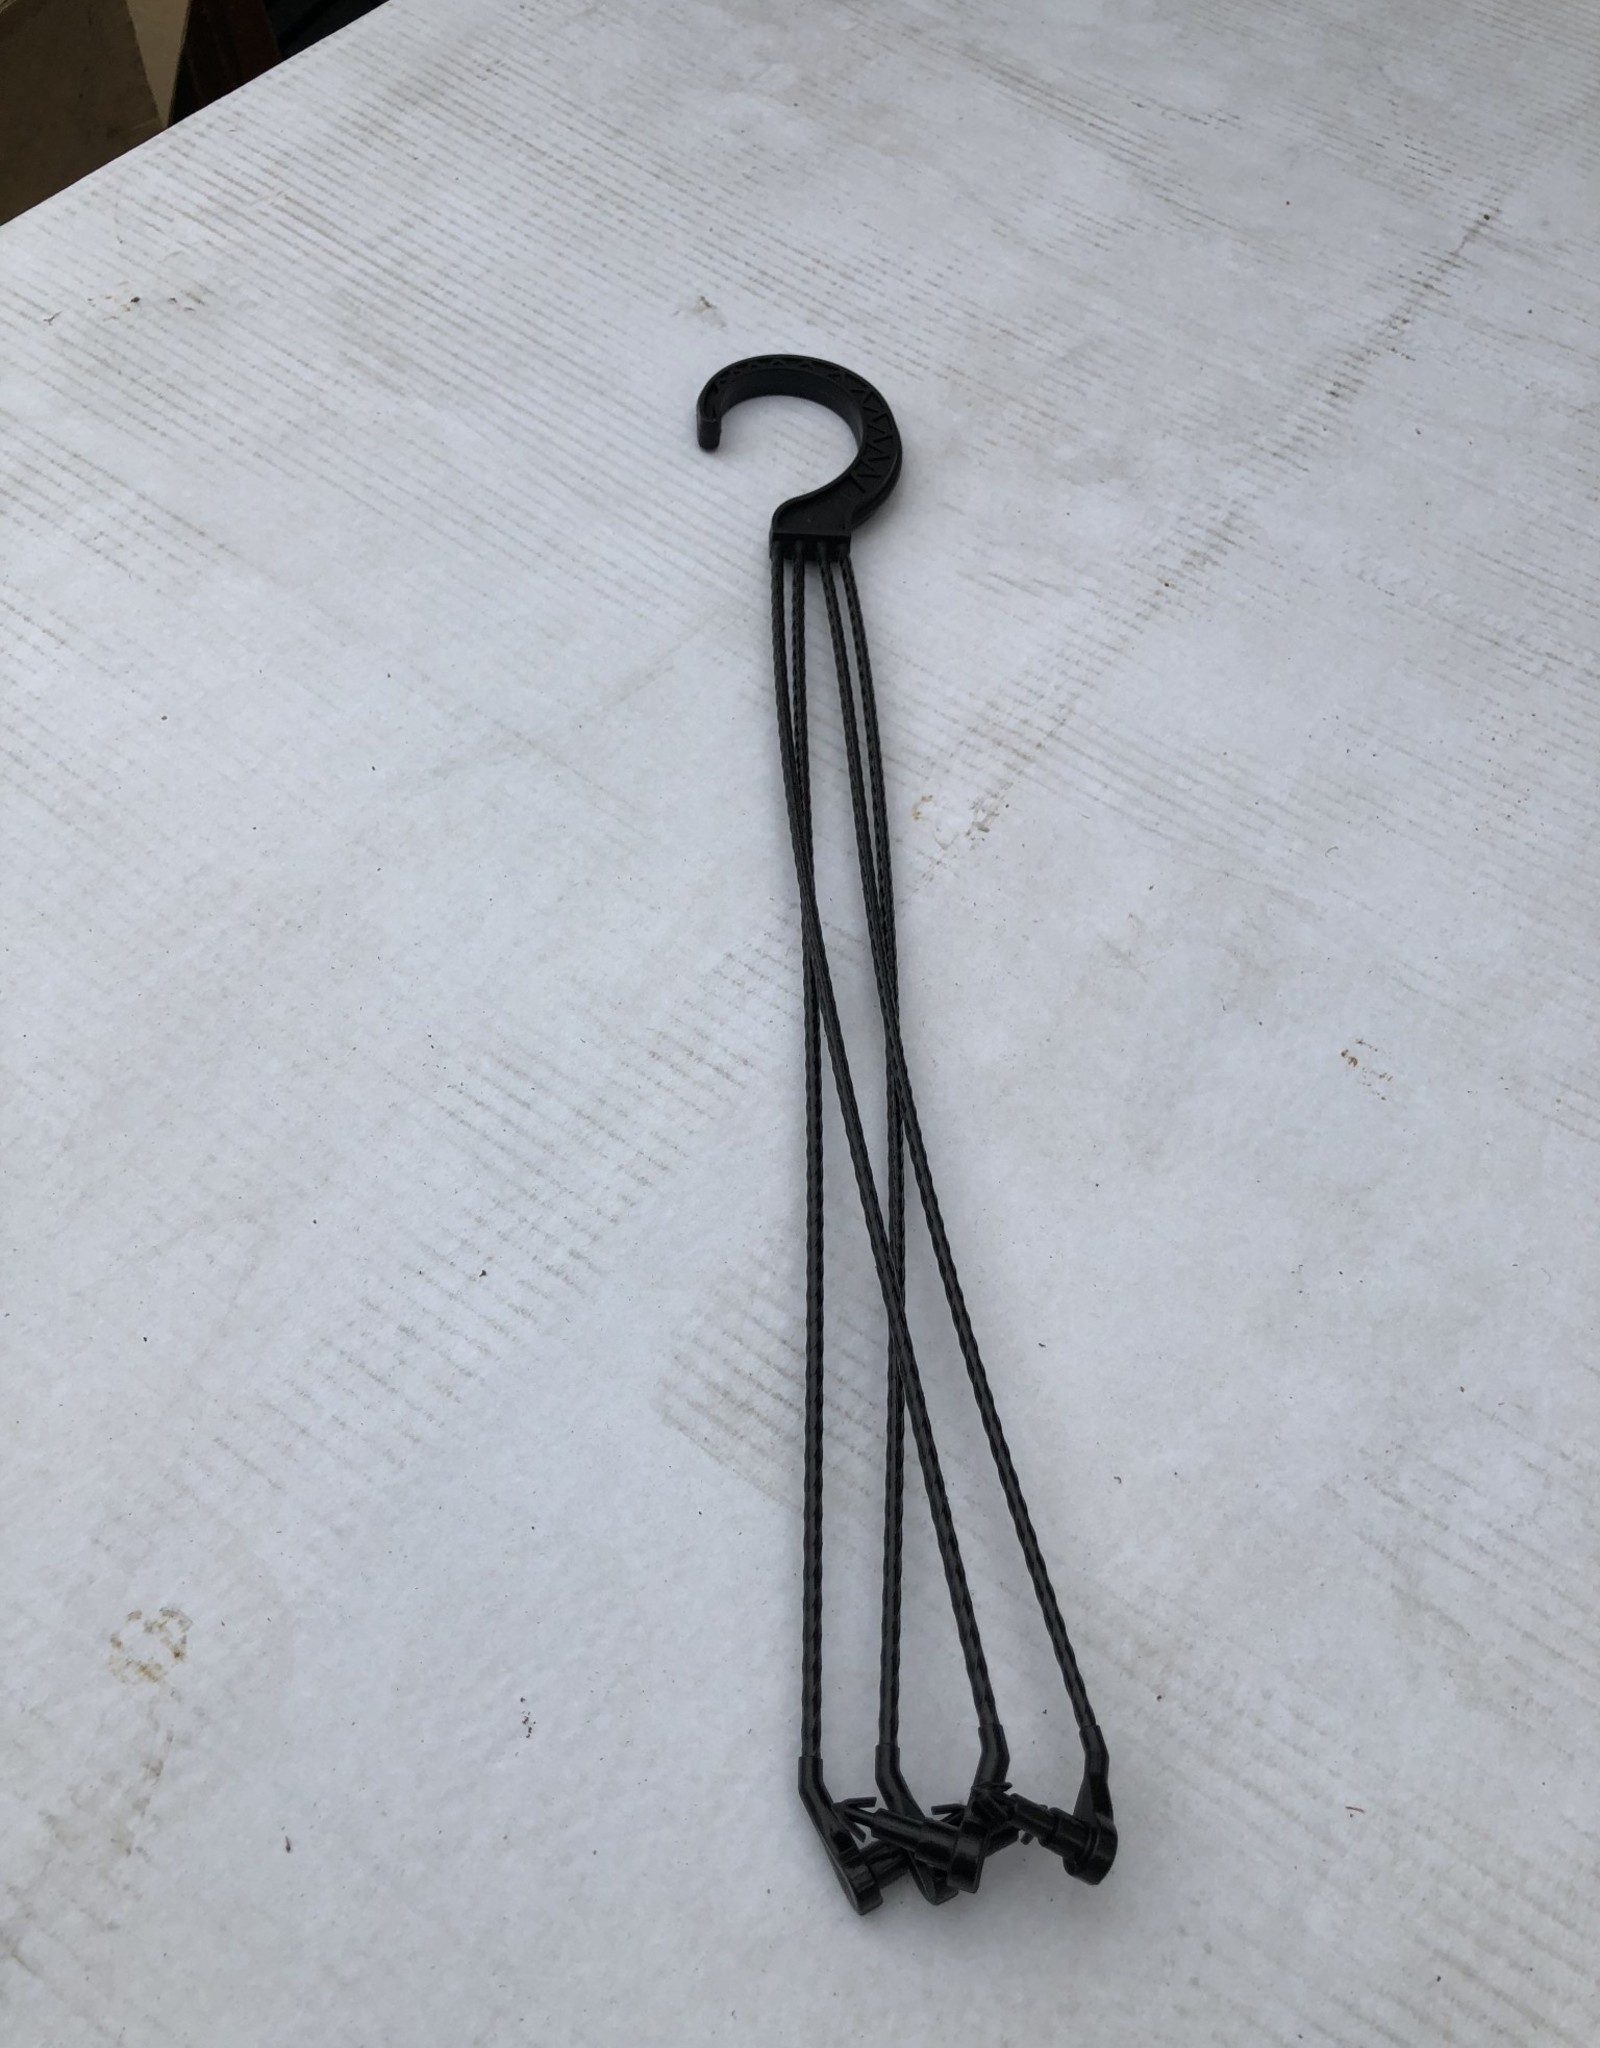 Western Pulp Products Western Pulp Nylon Hanger - Barbed